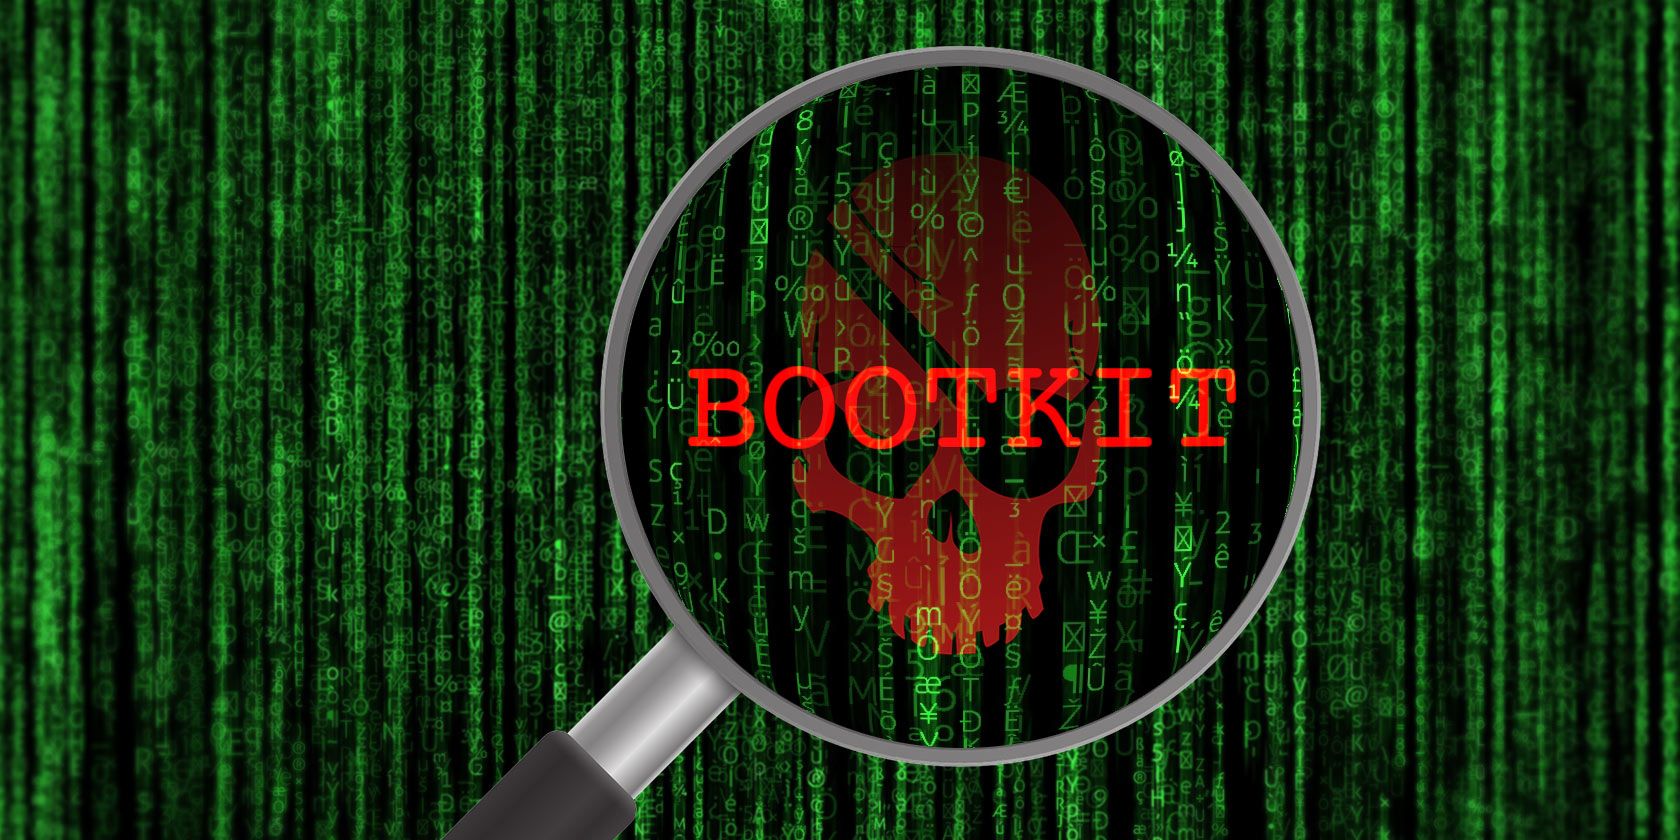 Experts discovered a UEFI bootkit